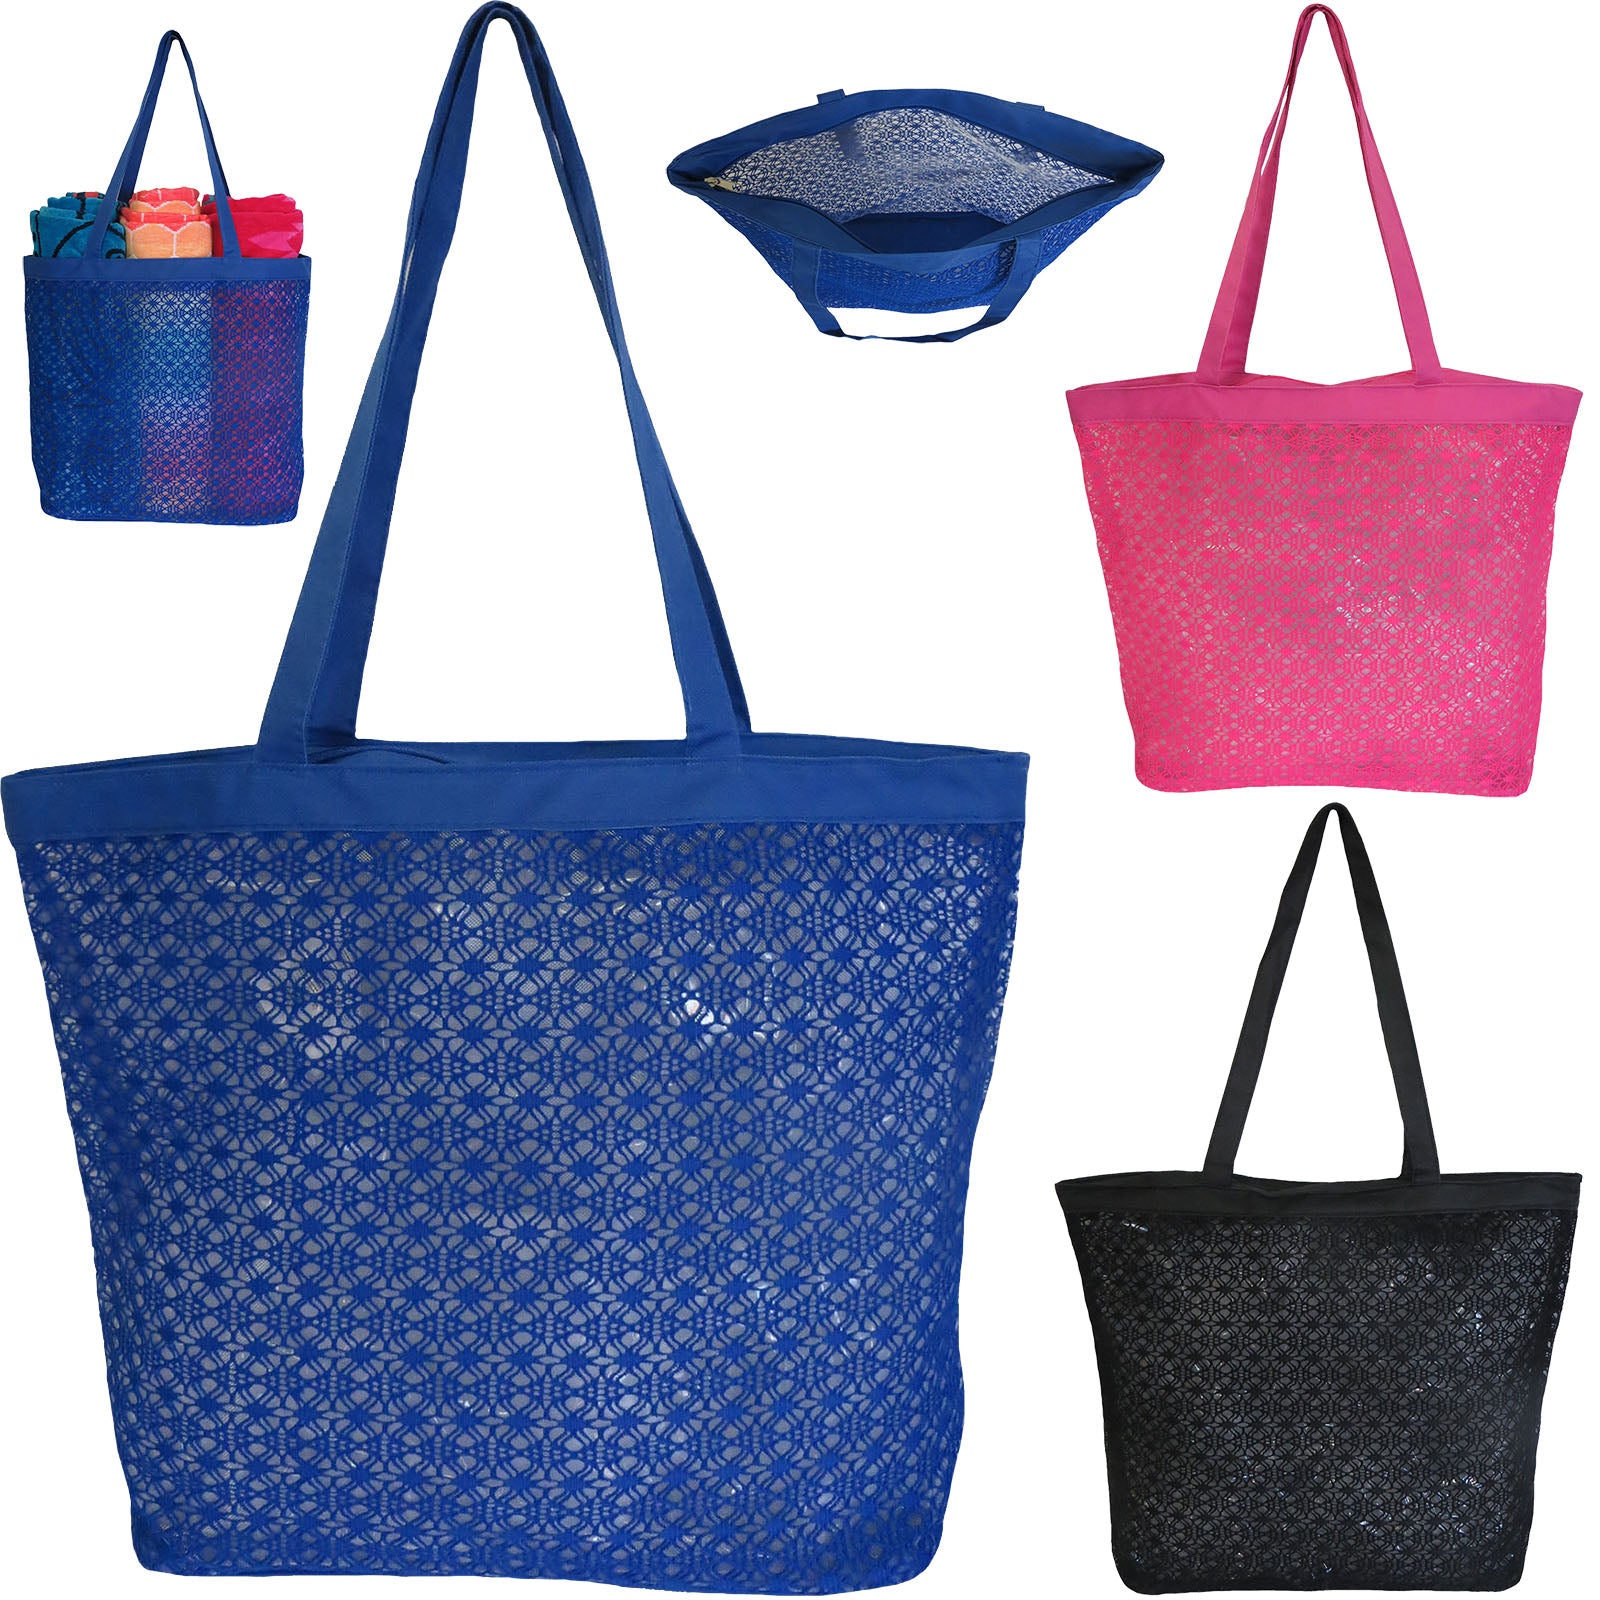 Wholesale Mesh Beach Bag Market Tote with Embroidery - Alessa Vibe